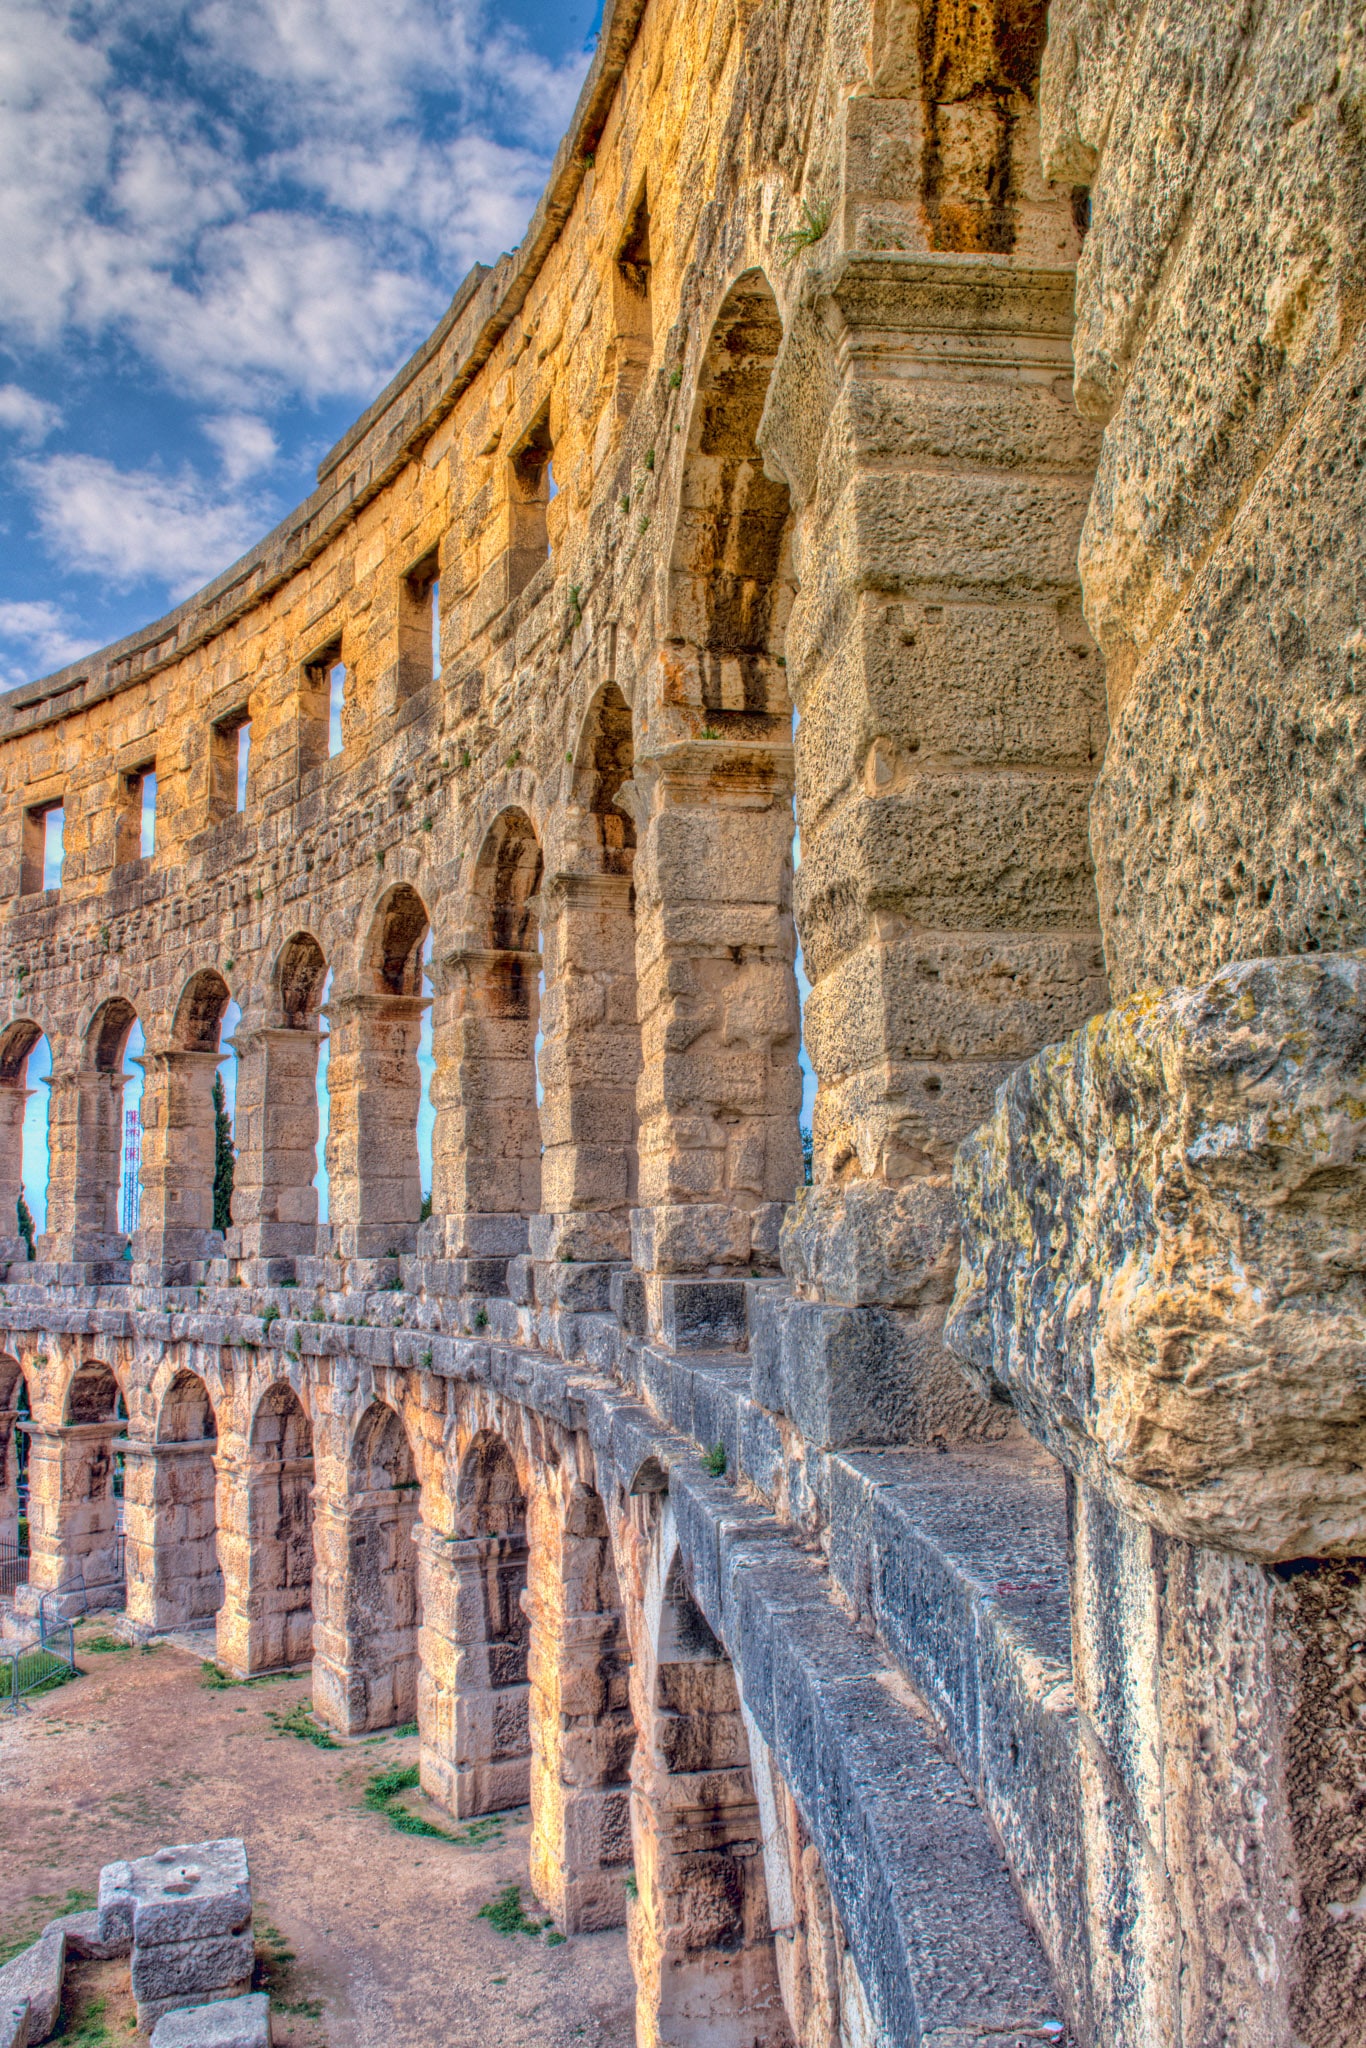 All three orders of Roman architecture are represented in this view of the walls of the Roman amphitheater in the Istrian city of Pula, Croatia.